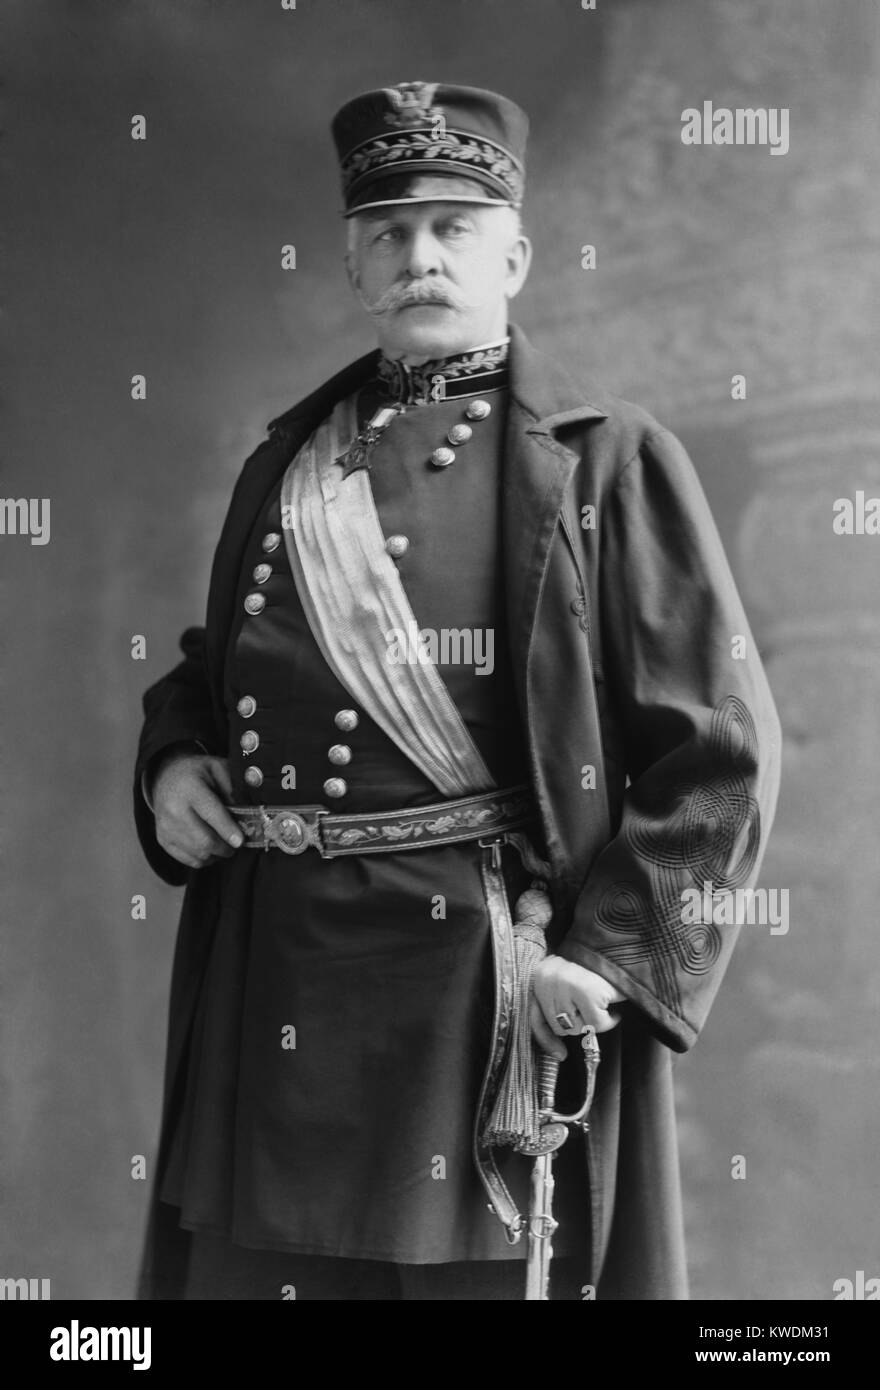 Gen. Nelson Miles, had Presidential ambitions after his victories in the Spanish-American War. He established his military reputation in the US Civil War and the Indian War. He was the commanding General over the Massacre of Wounded Knee on Dec. 29, 1890 (BSLOC 2017 10 42) Stock Photo